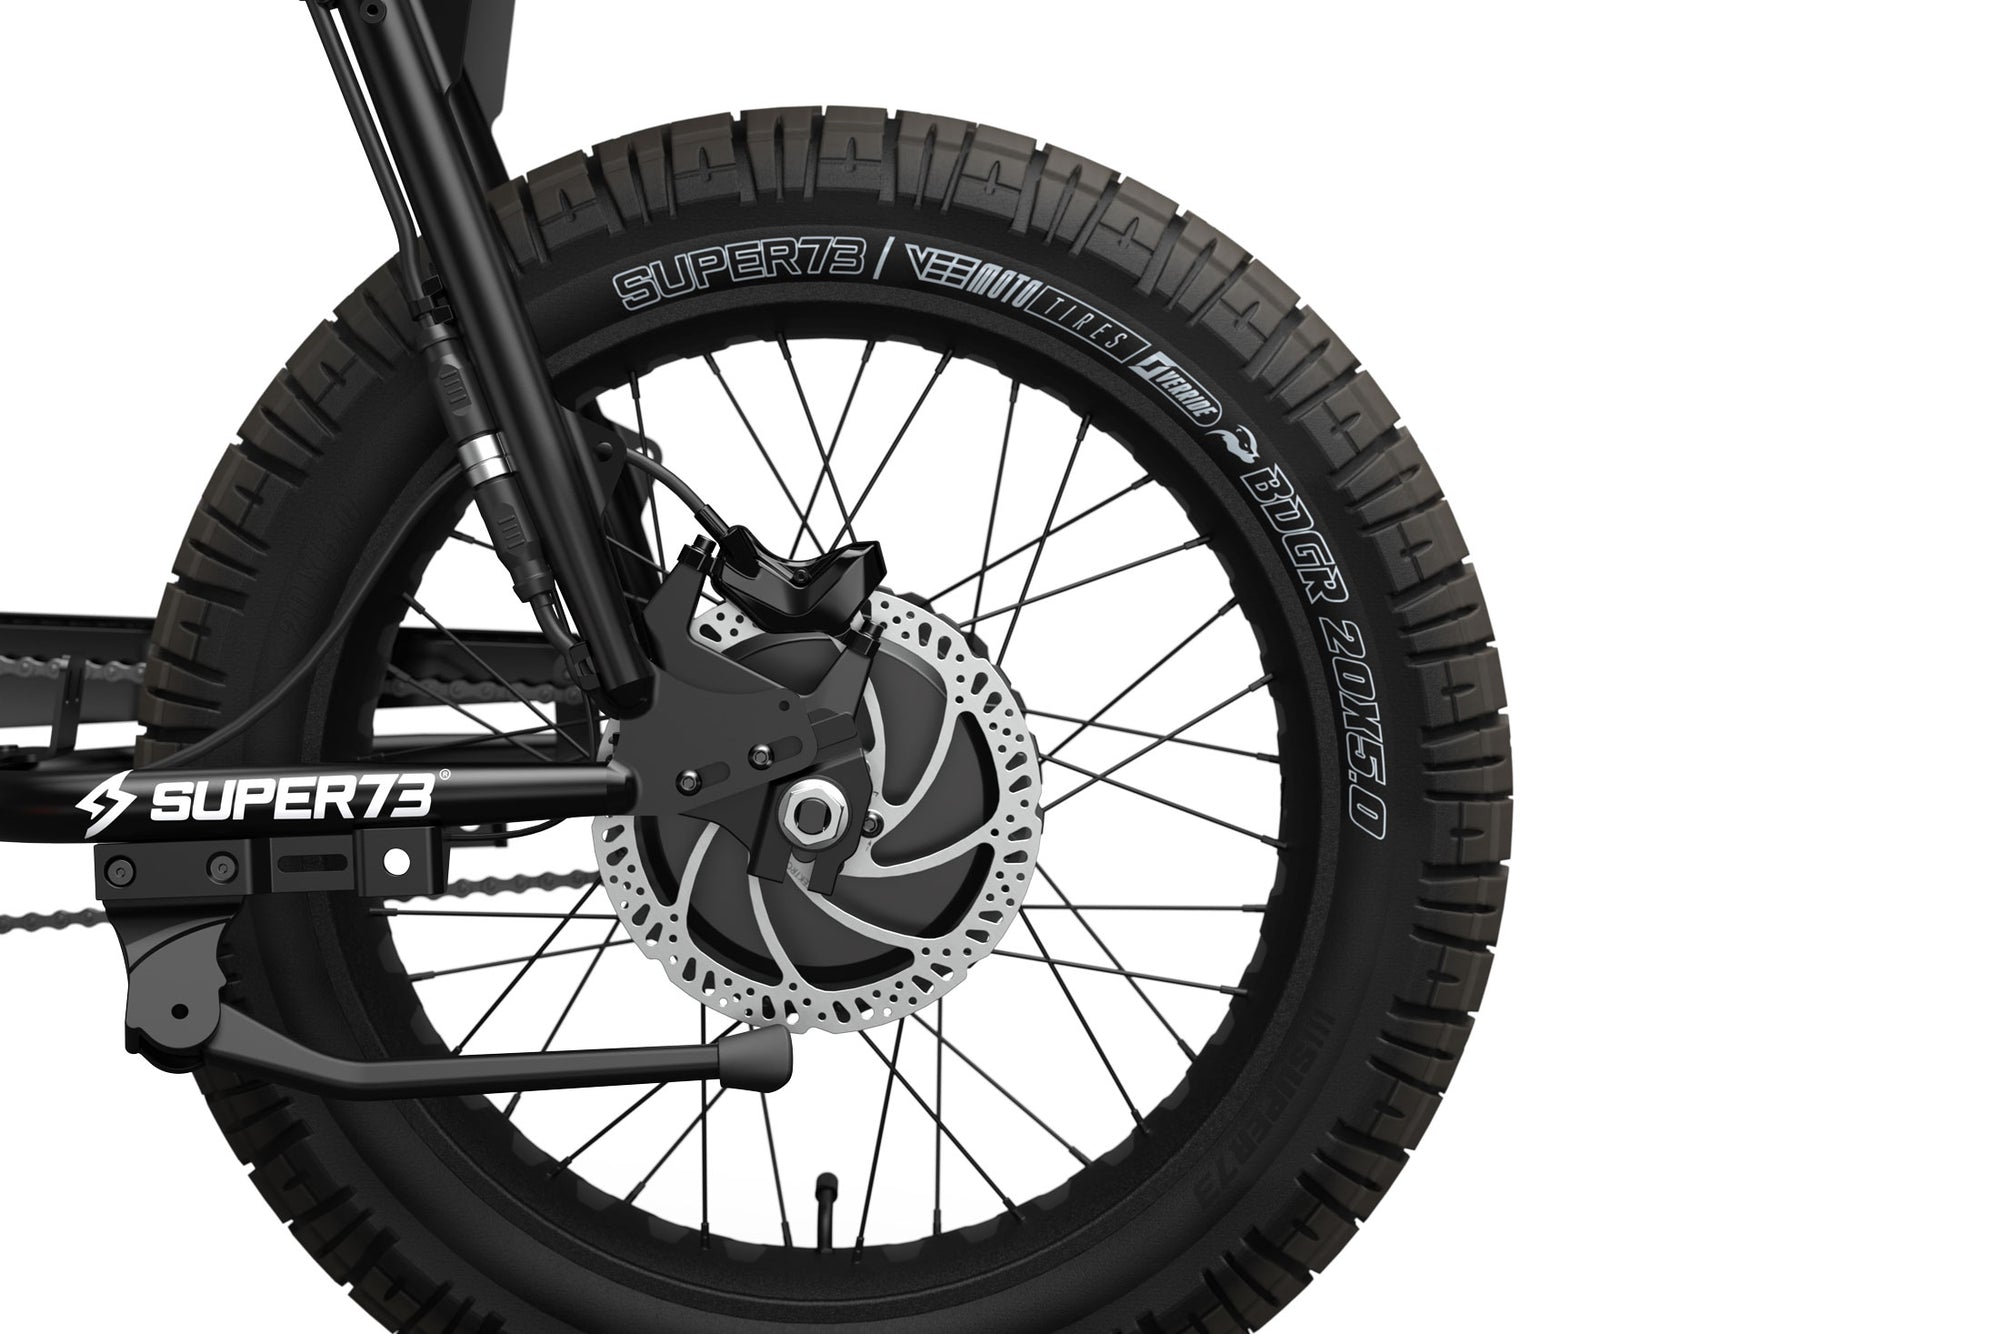 Detail shot of the SUPER73-S2 rear tire.